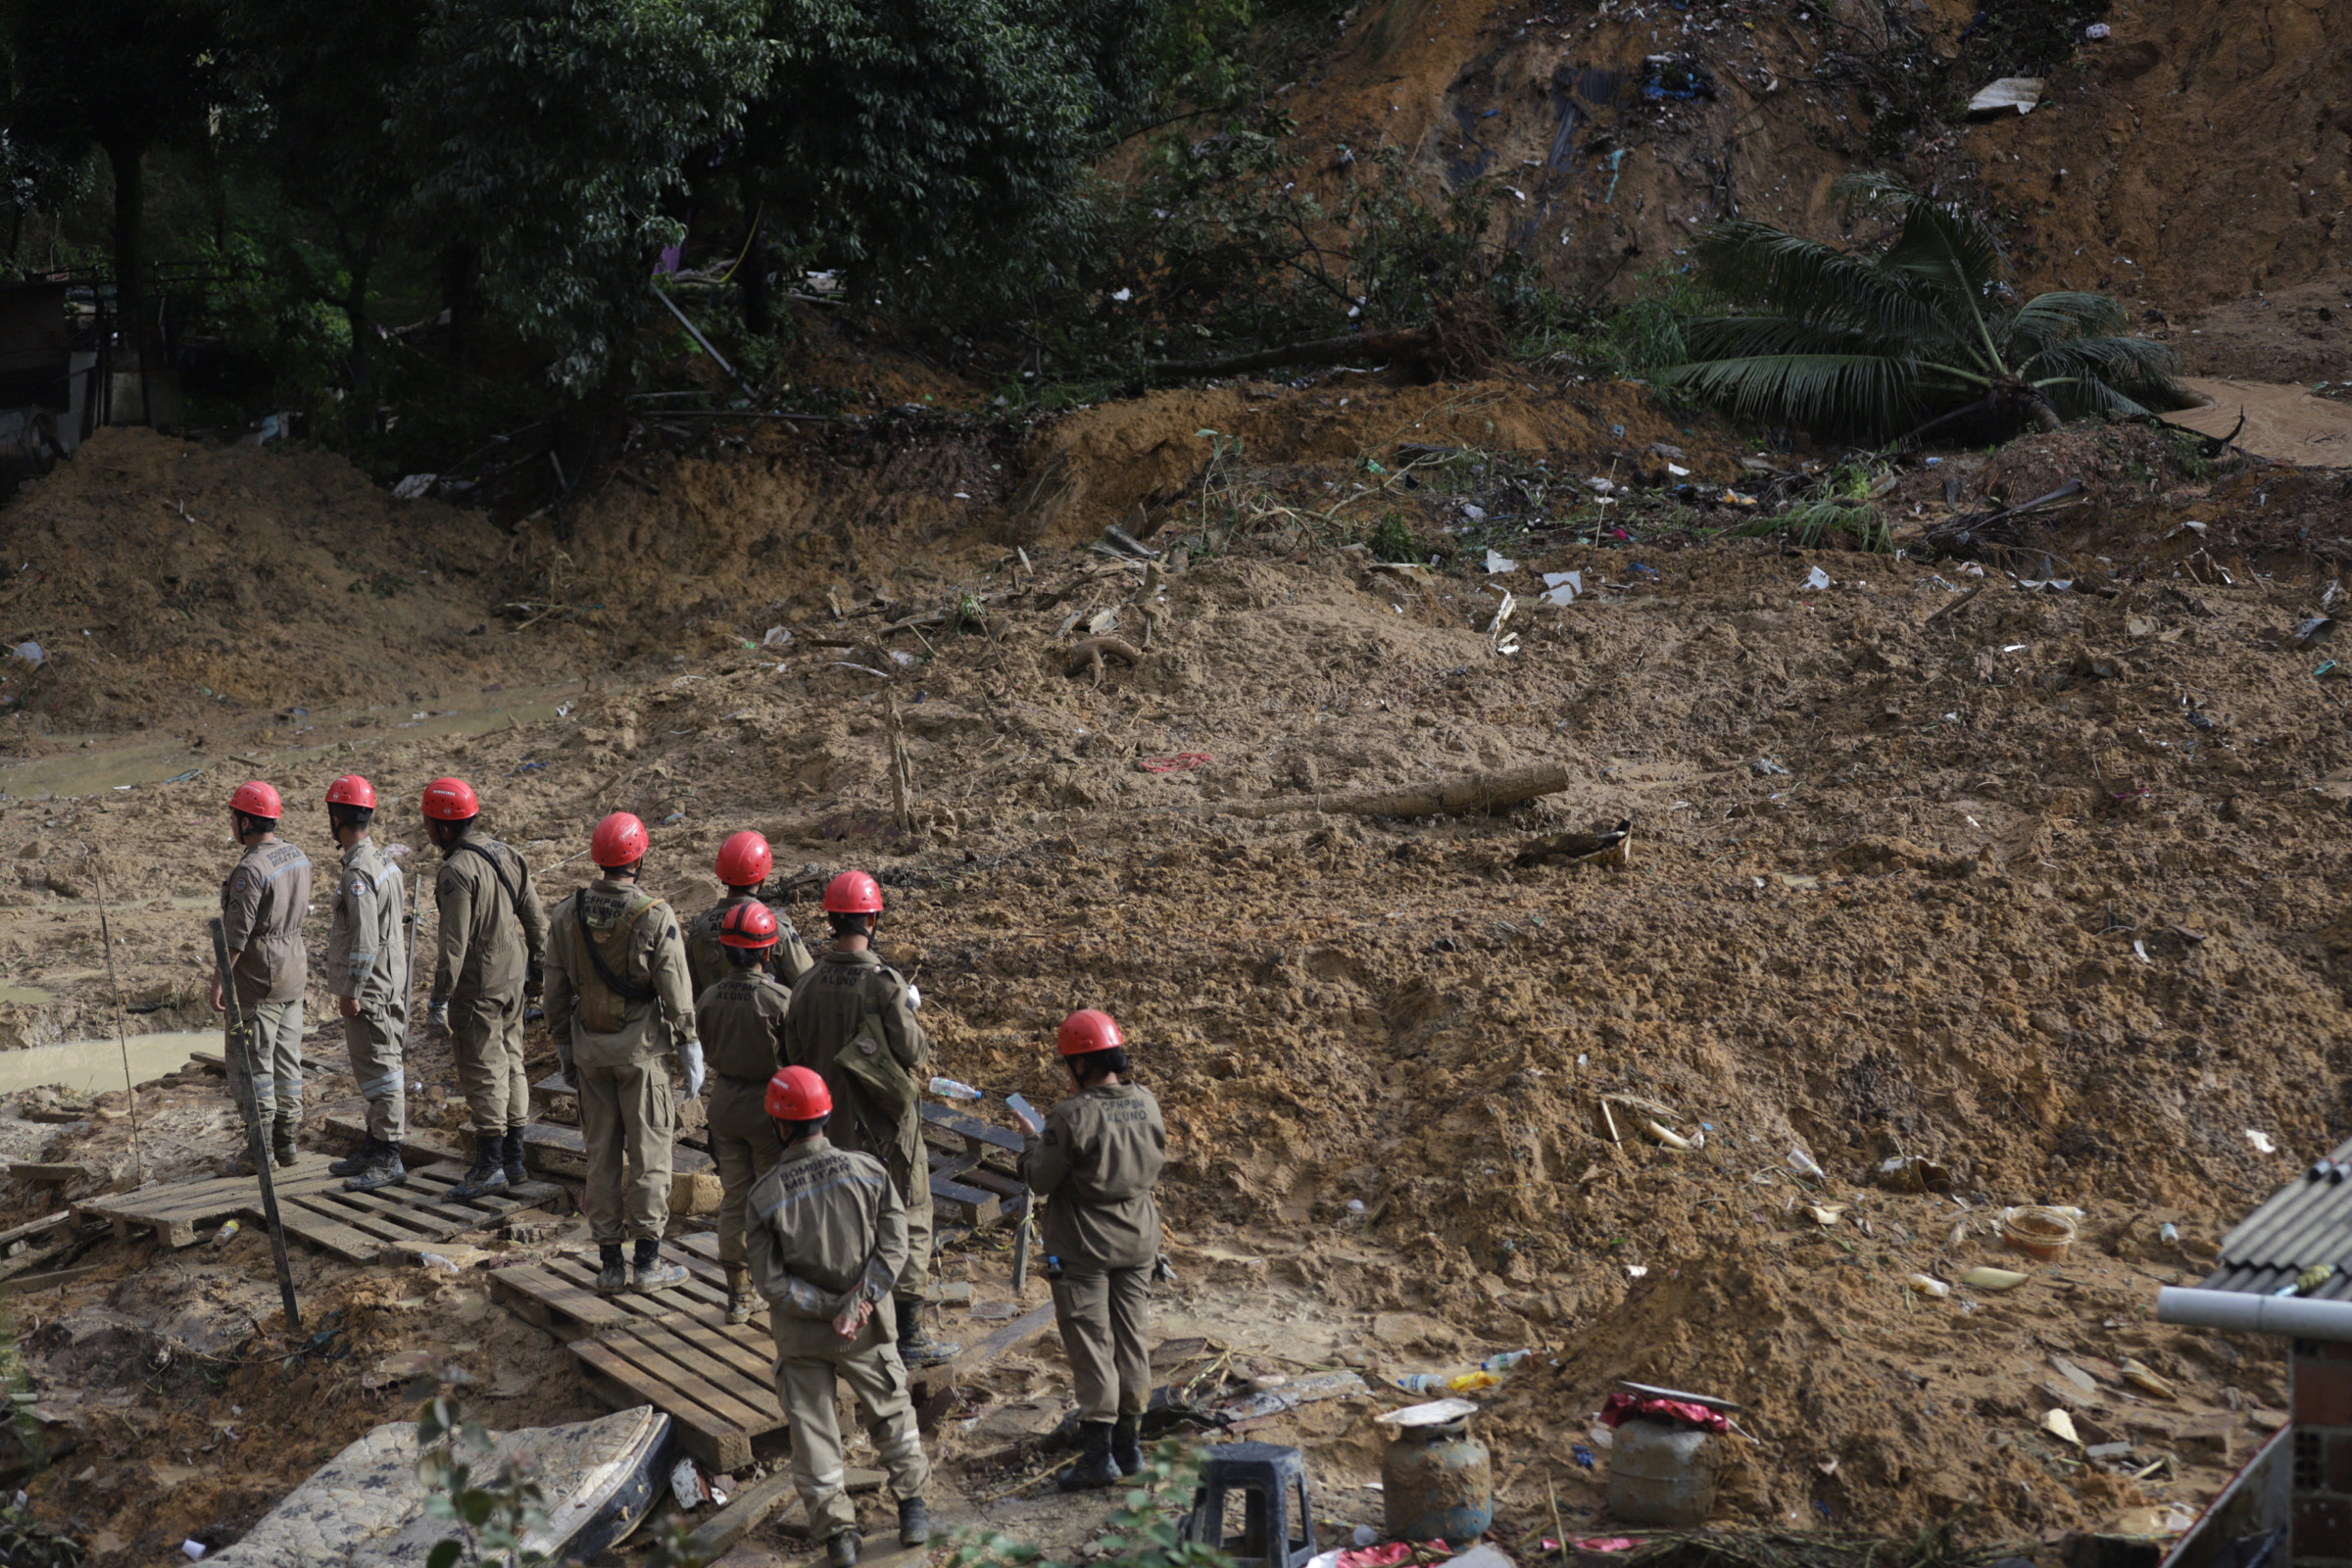 Firefighters: At Least 30 Engulfed by Brazil Landslide